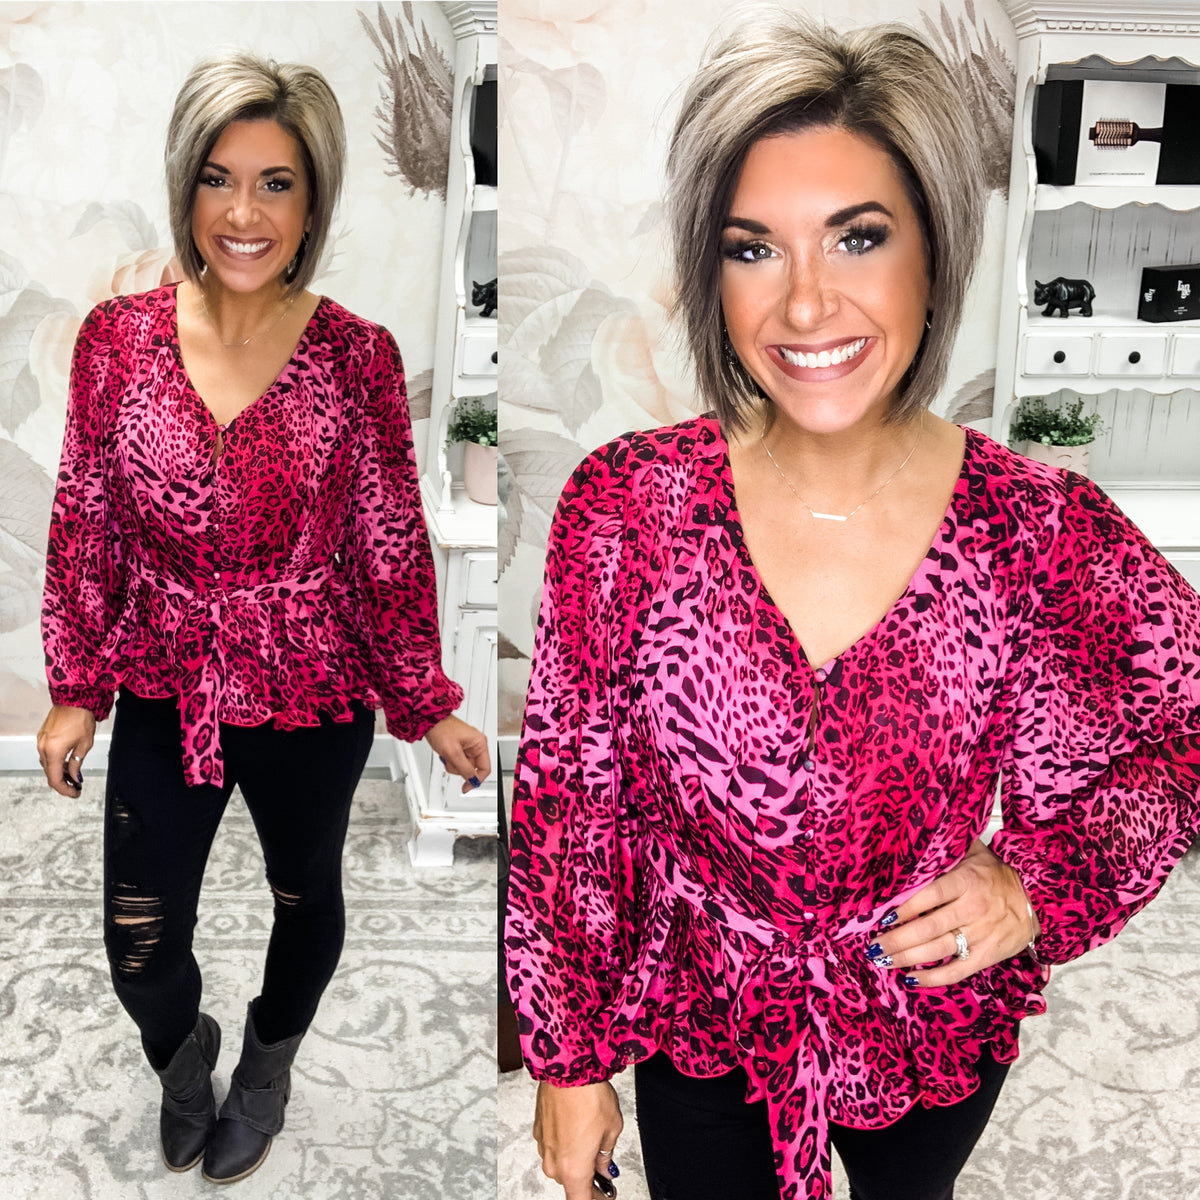 Forget About The Troubles Blouse